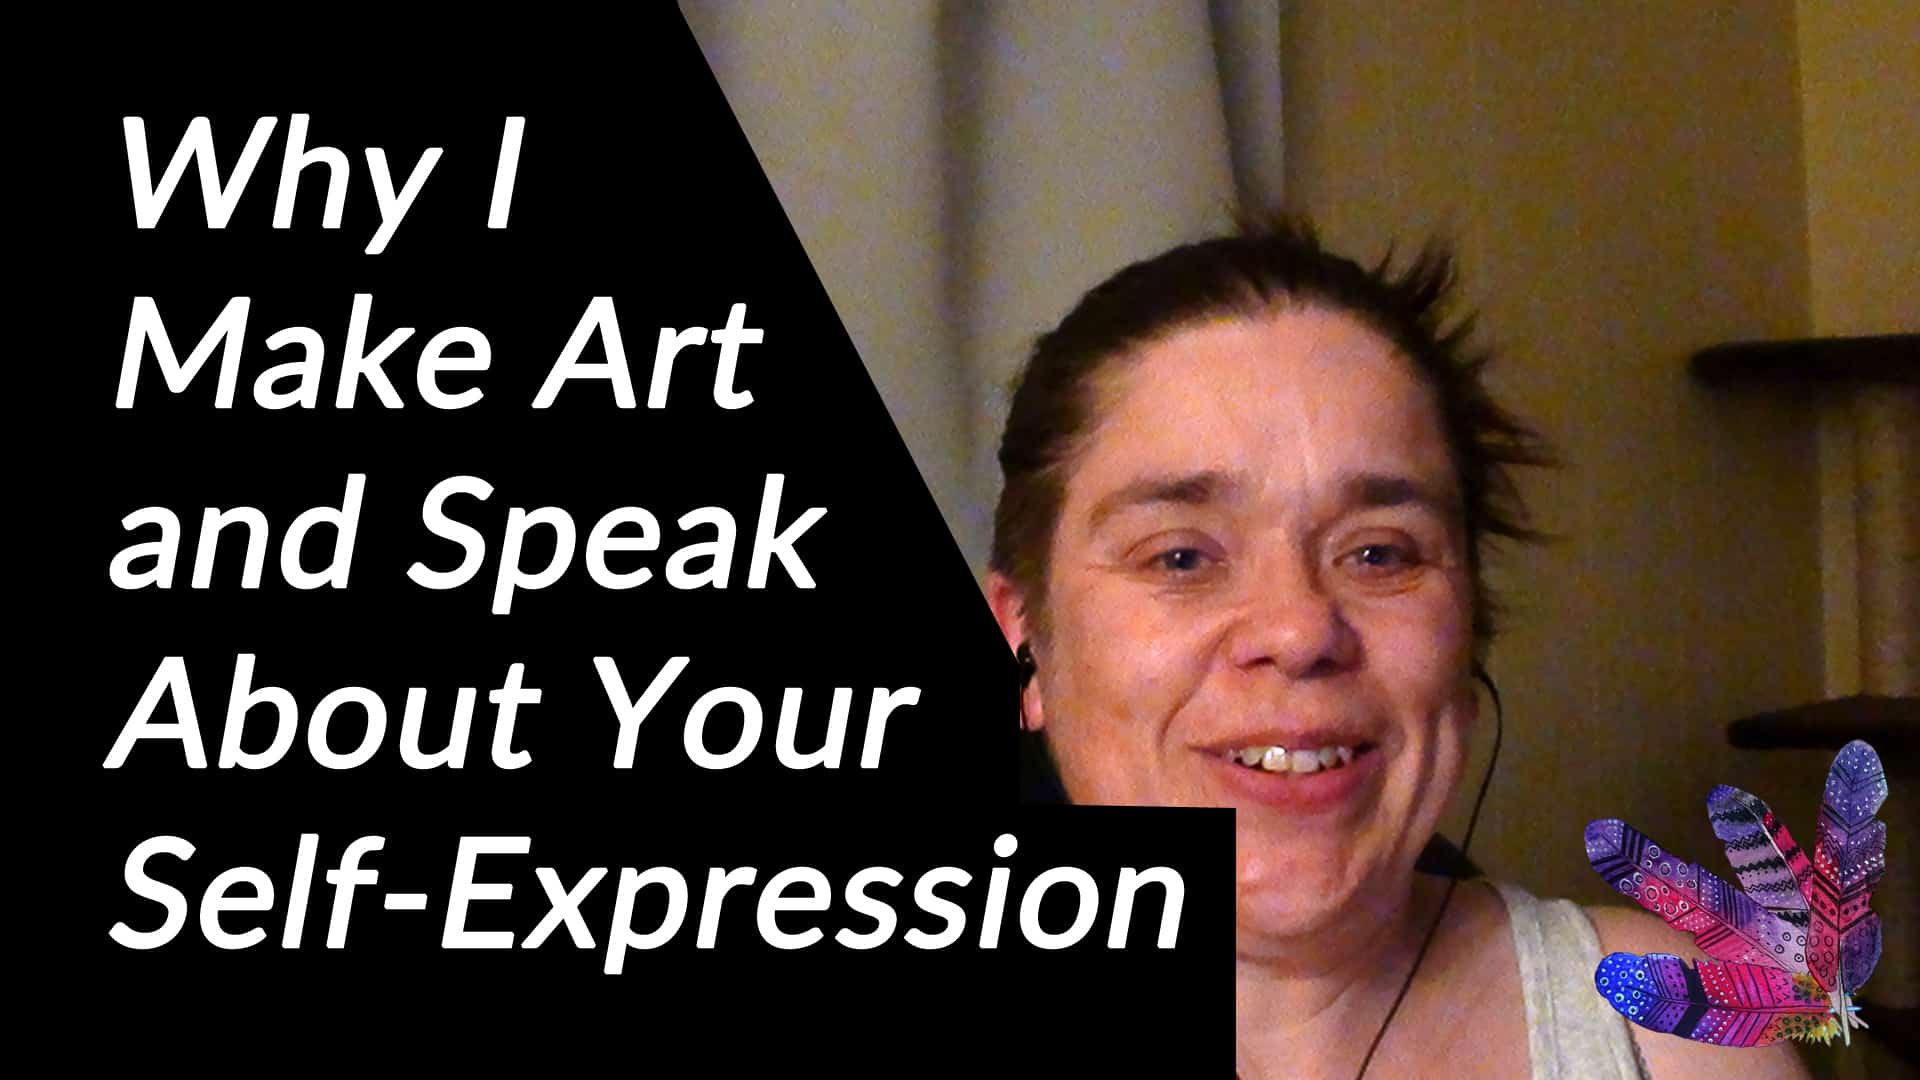 Why I Make Art and Speak About Your Self-Expression